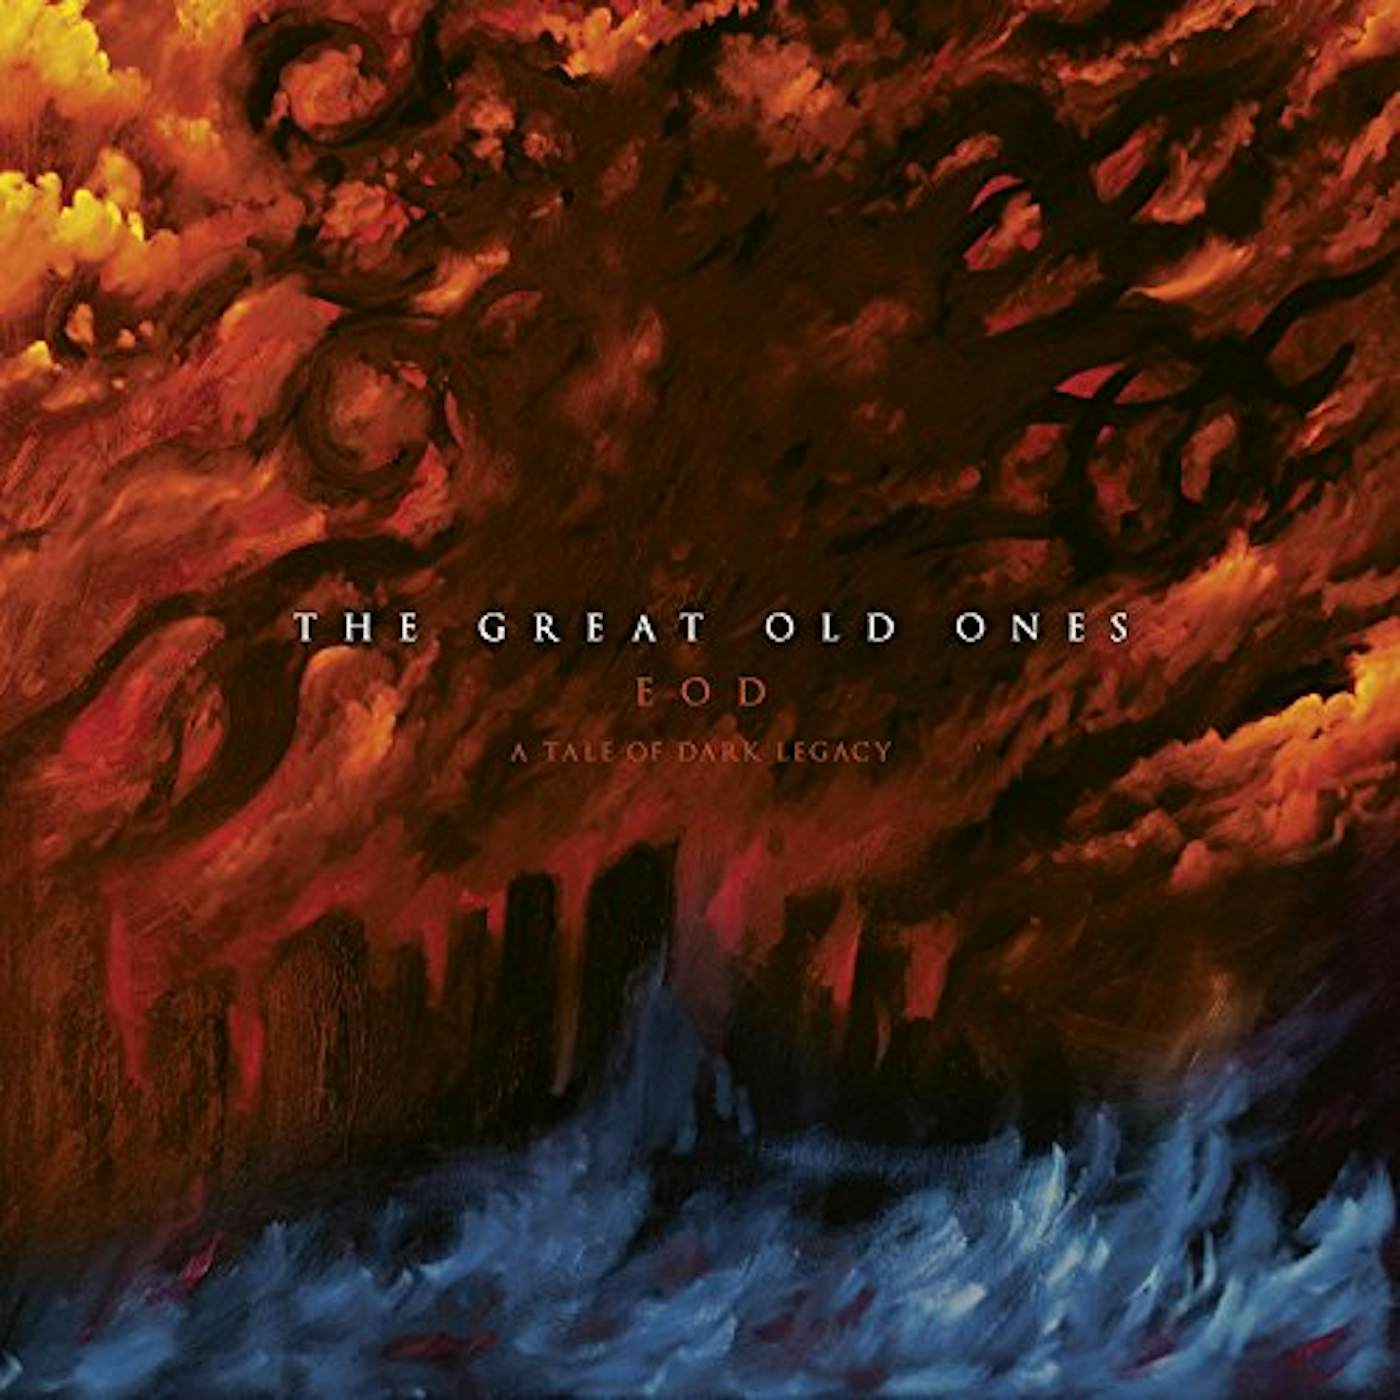 The Great Old Ones EOD: A TALE OF DARK LEGACY (LTD. ED. OPAQUE WHITE/DOUBLE GATEFOLD LP) Vinyl Record